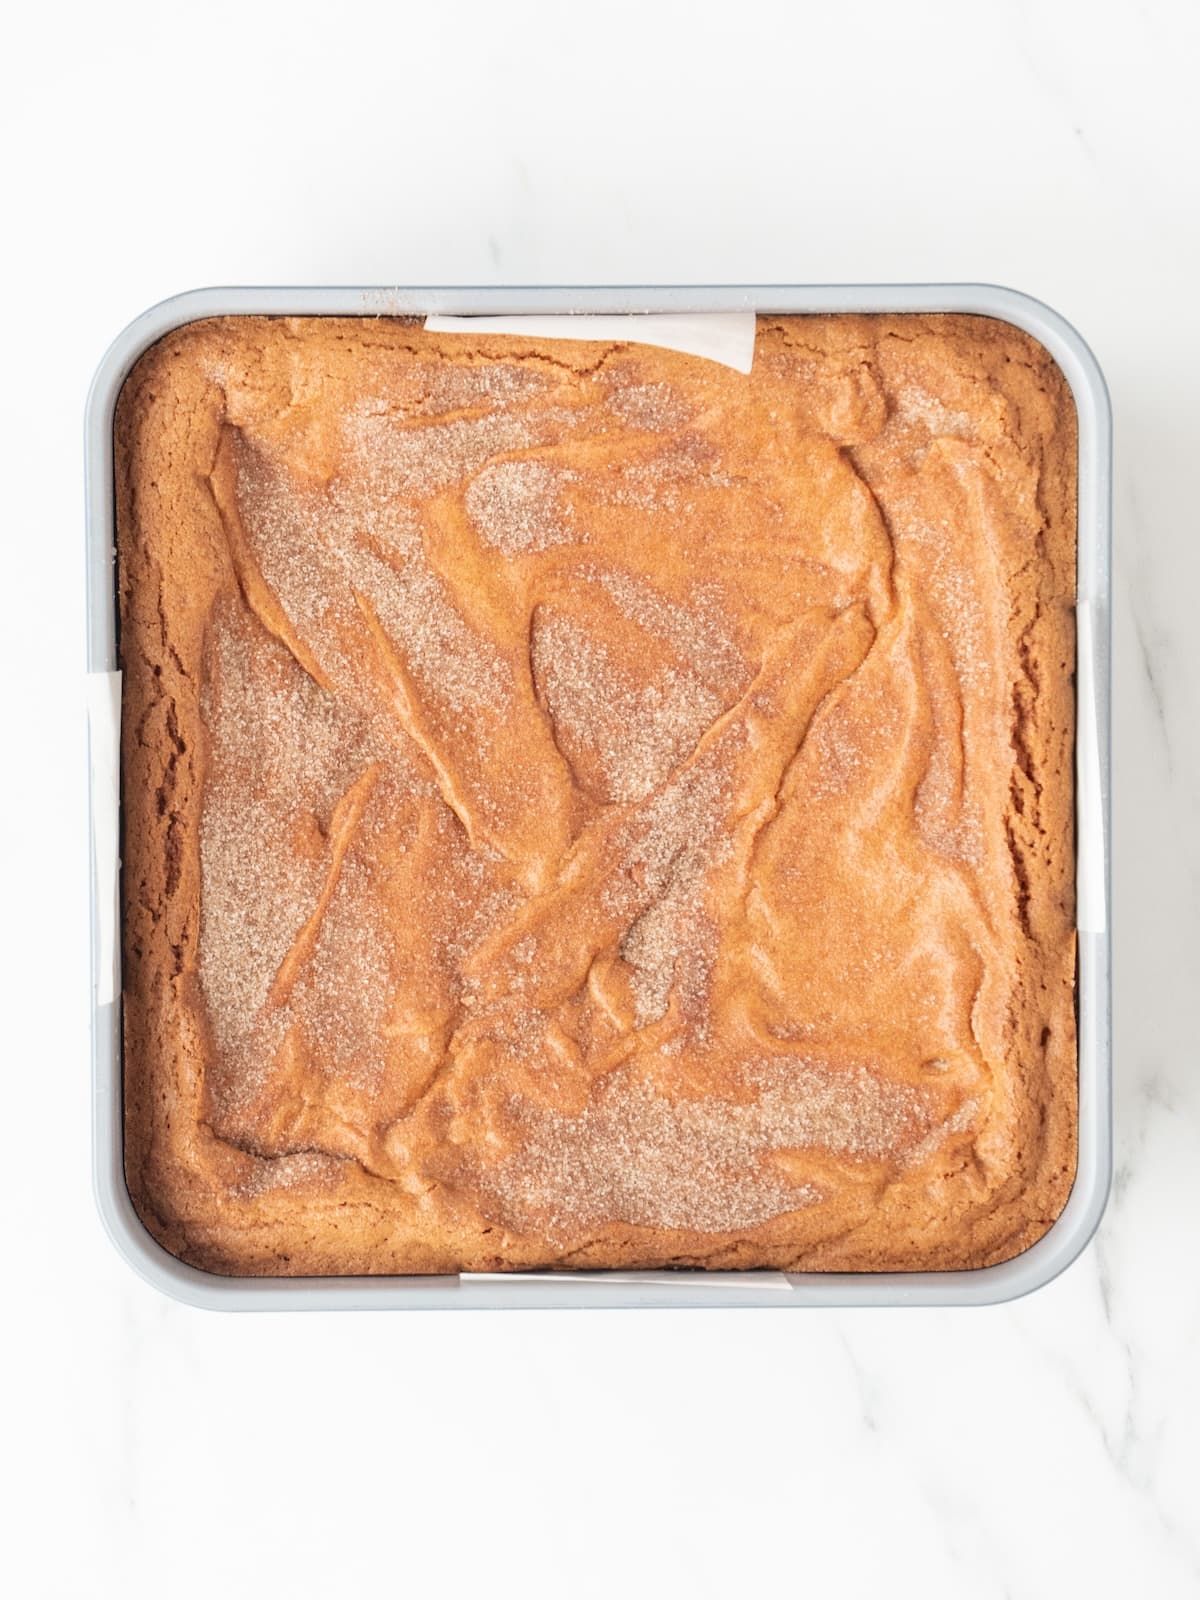 A 9x9 inch baking pan with snickerdoodle blondie brownie baked and fresh out of the oven.